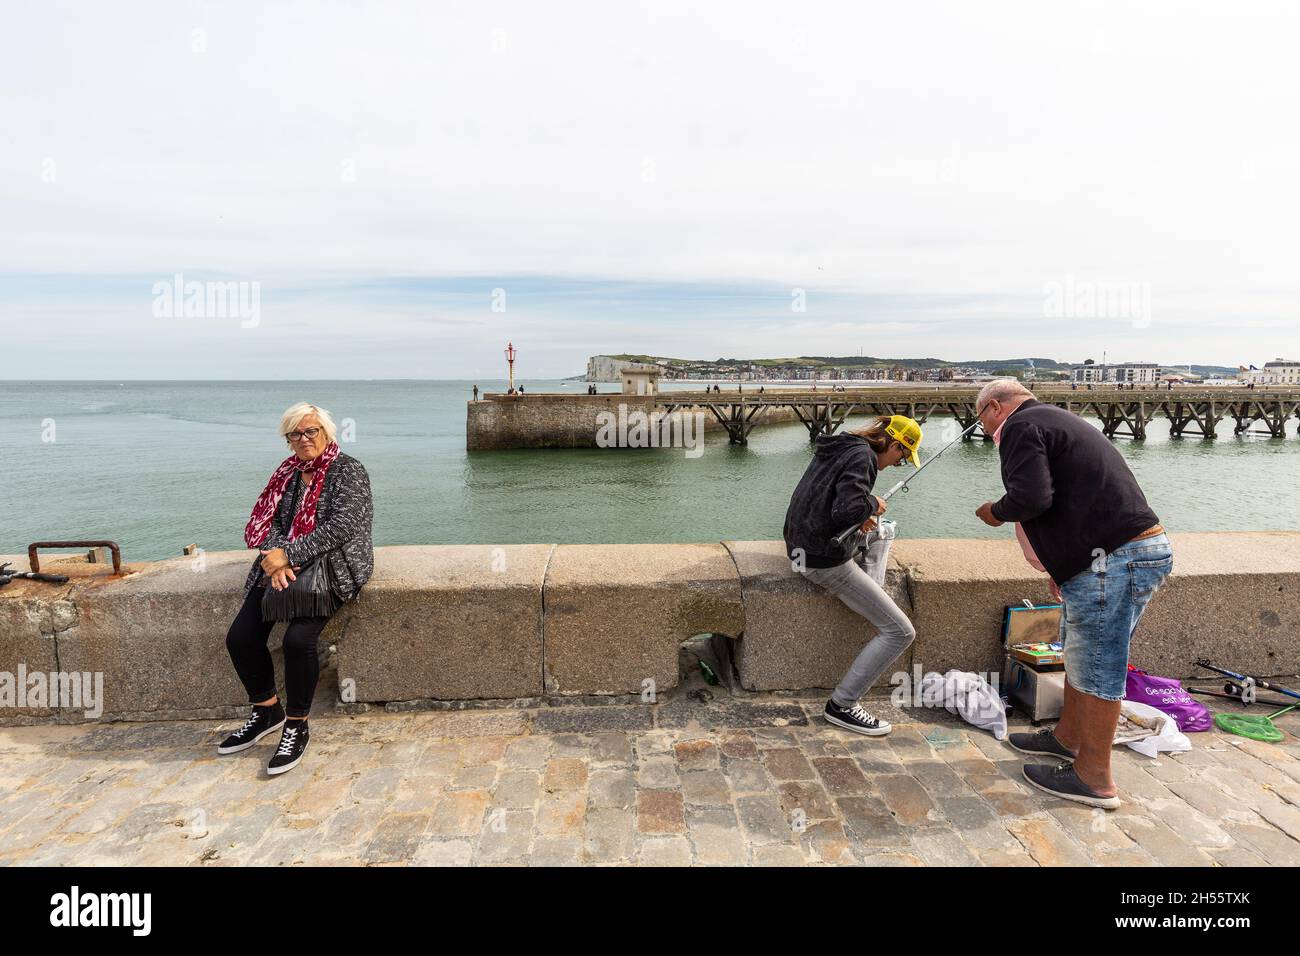 Lady seated and fishermen on a dike at the entrance to the harbor of Le Tréport, France Stock Photo